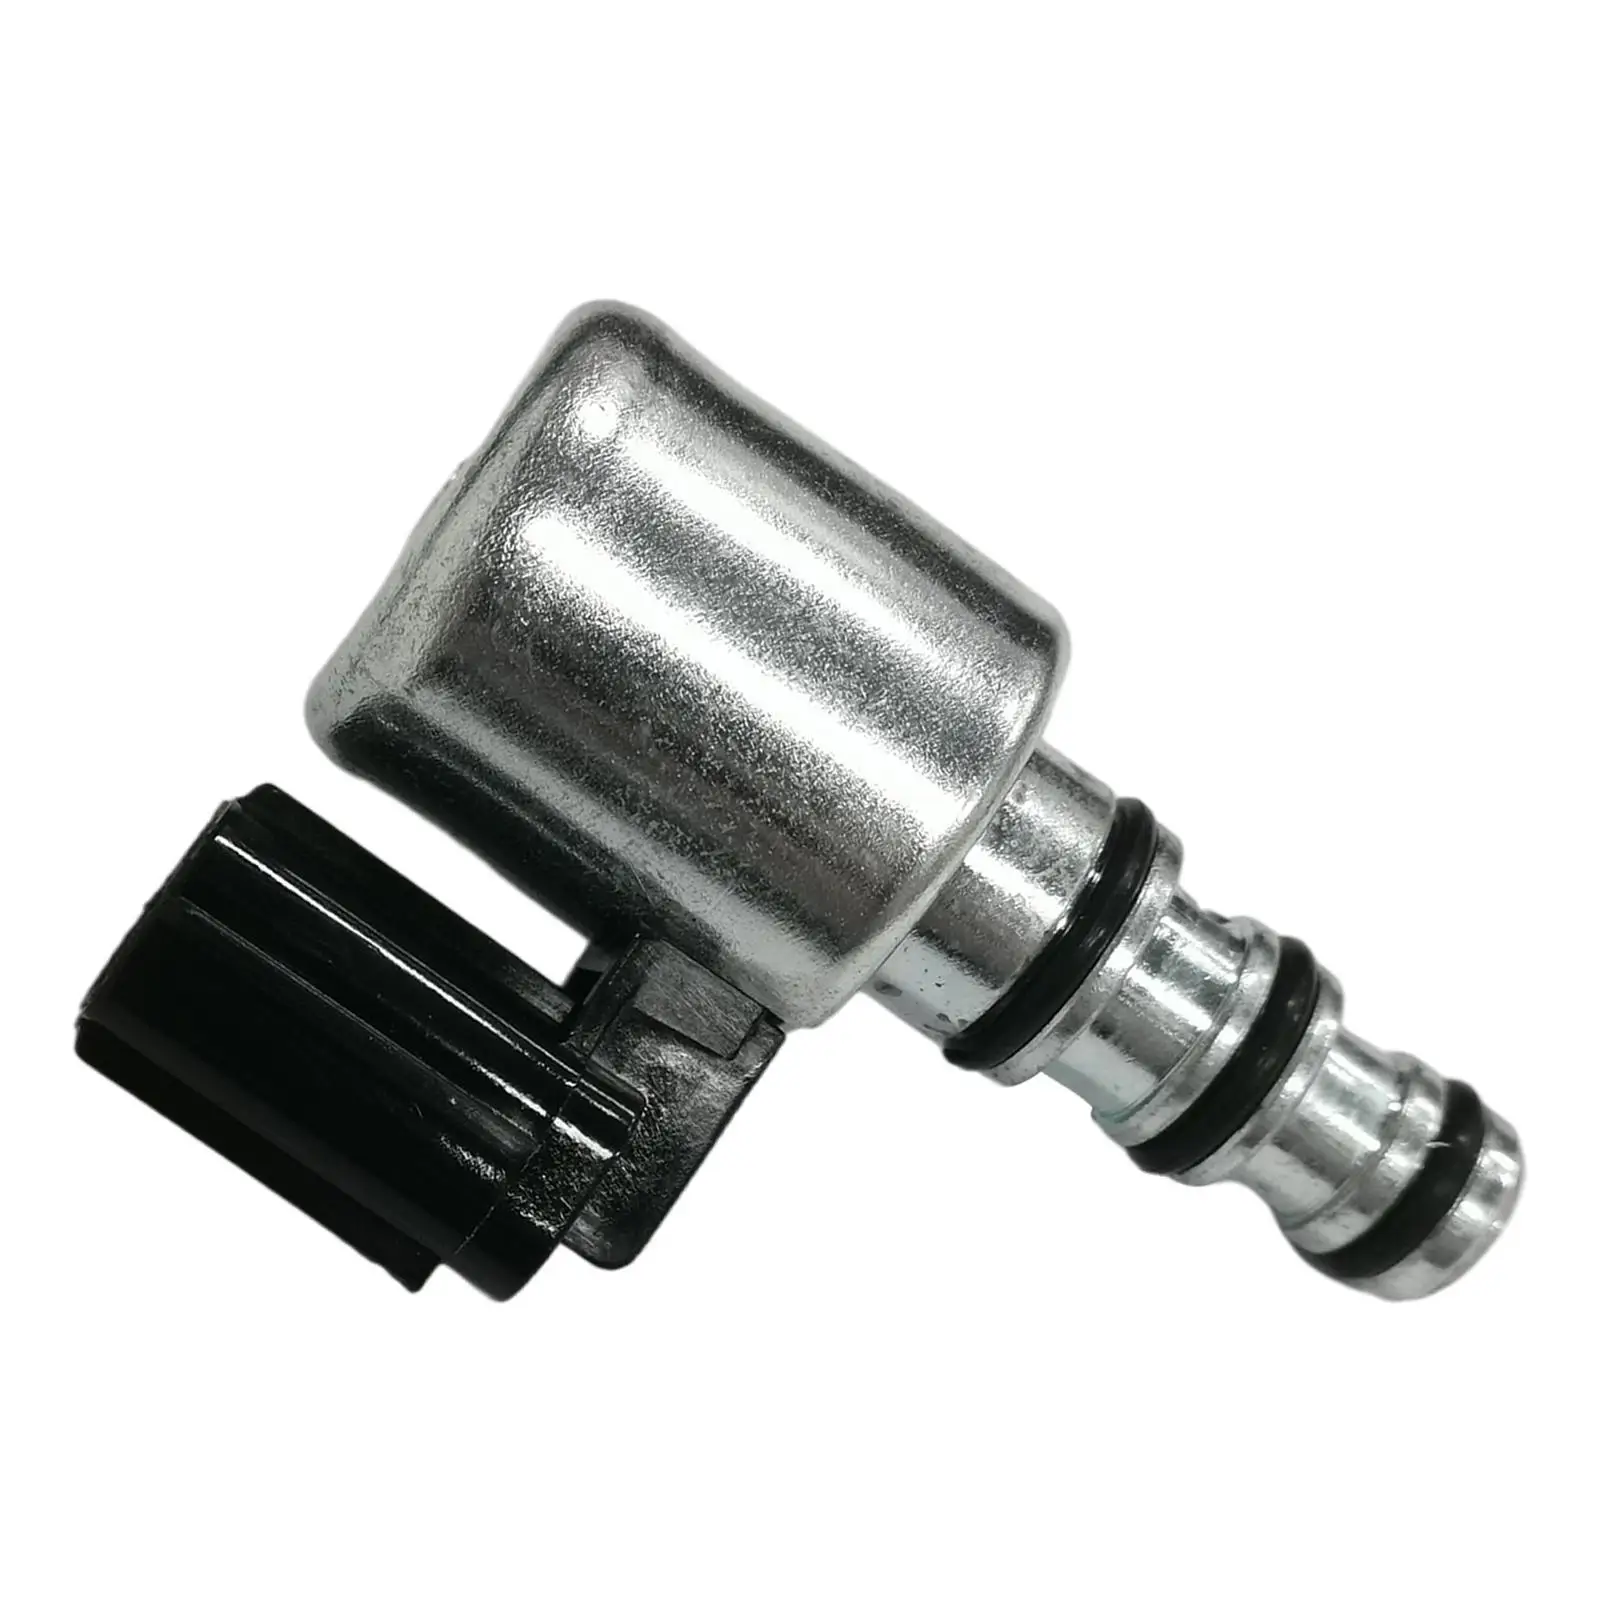 Transmission  Control Solenoid Fits for Replace Accessories